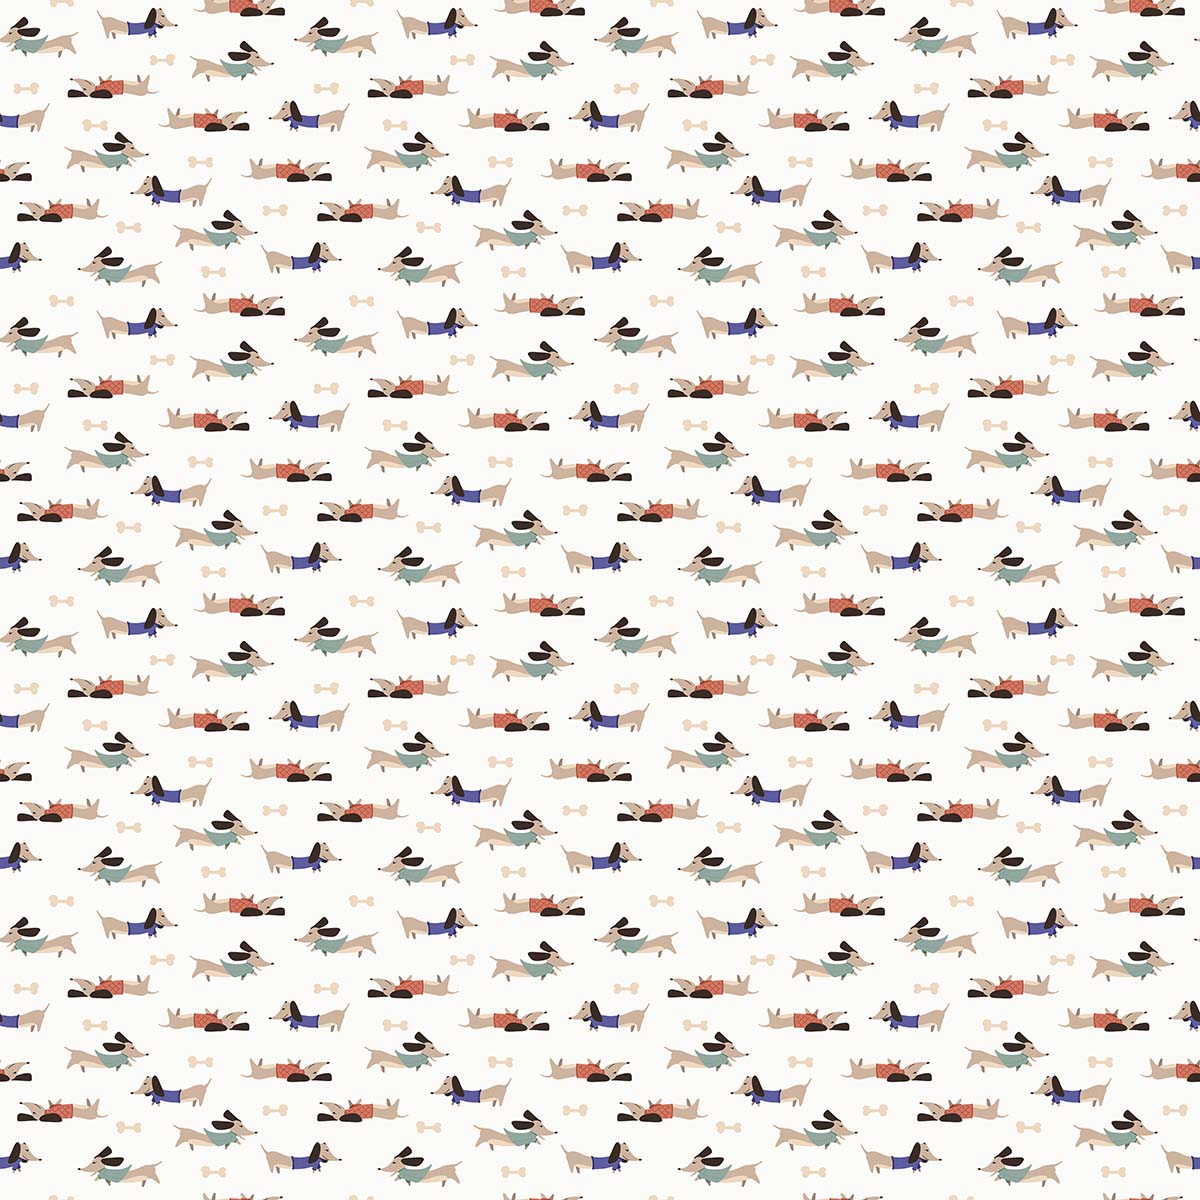 A pattern of dogs wearing clothes